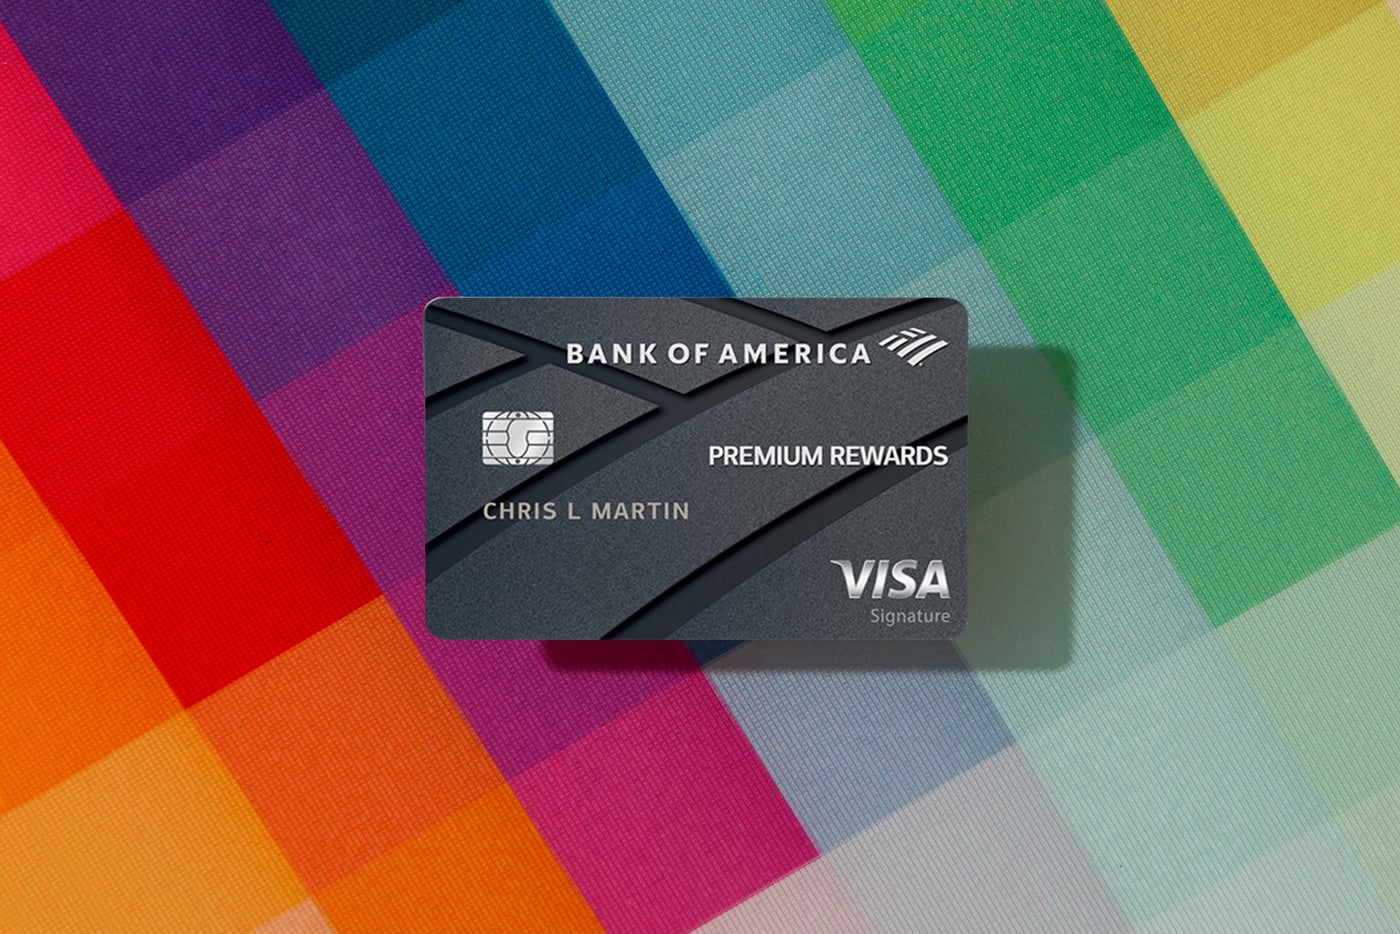 Bank of America Premium Rewards Review Full Details The Points Guy